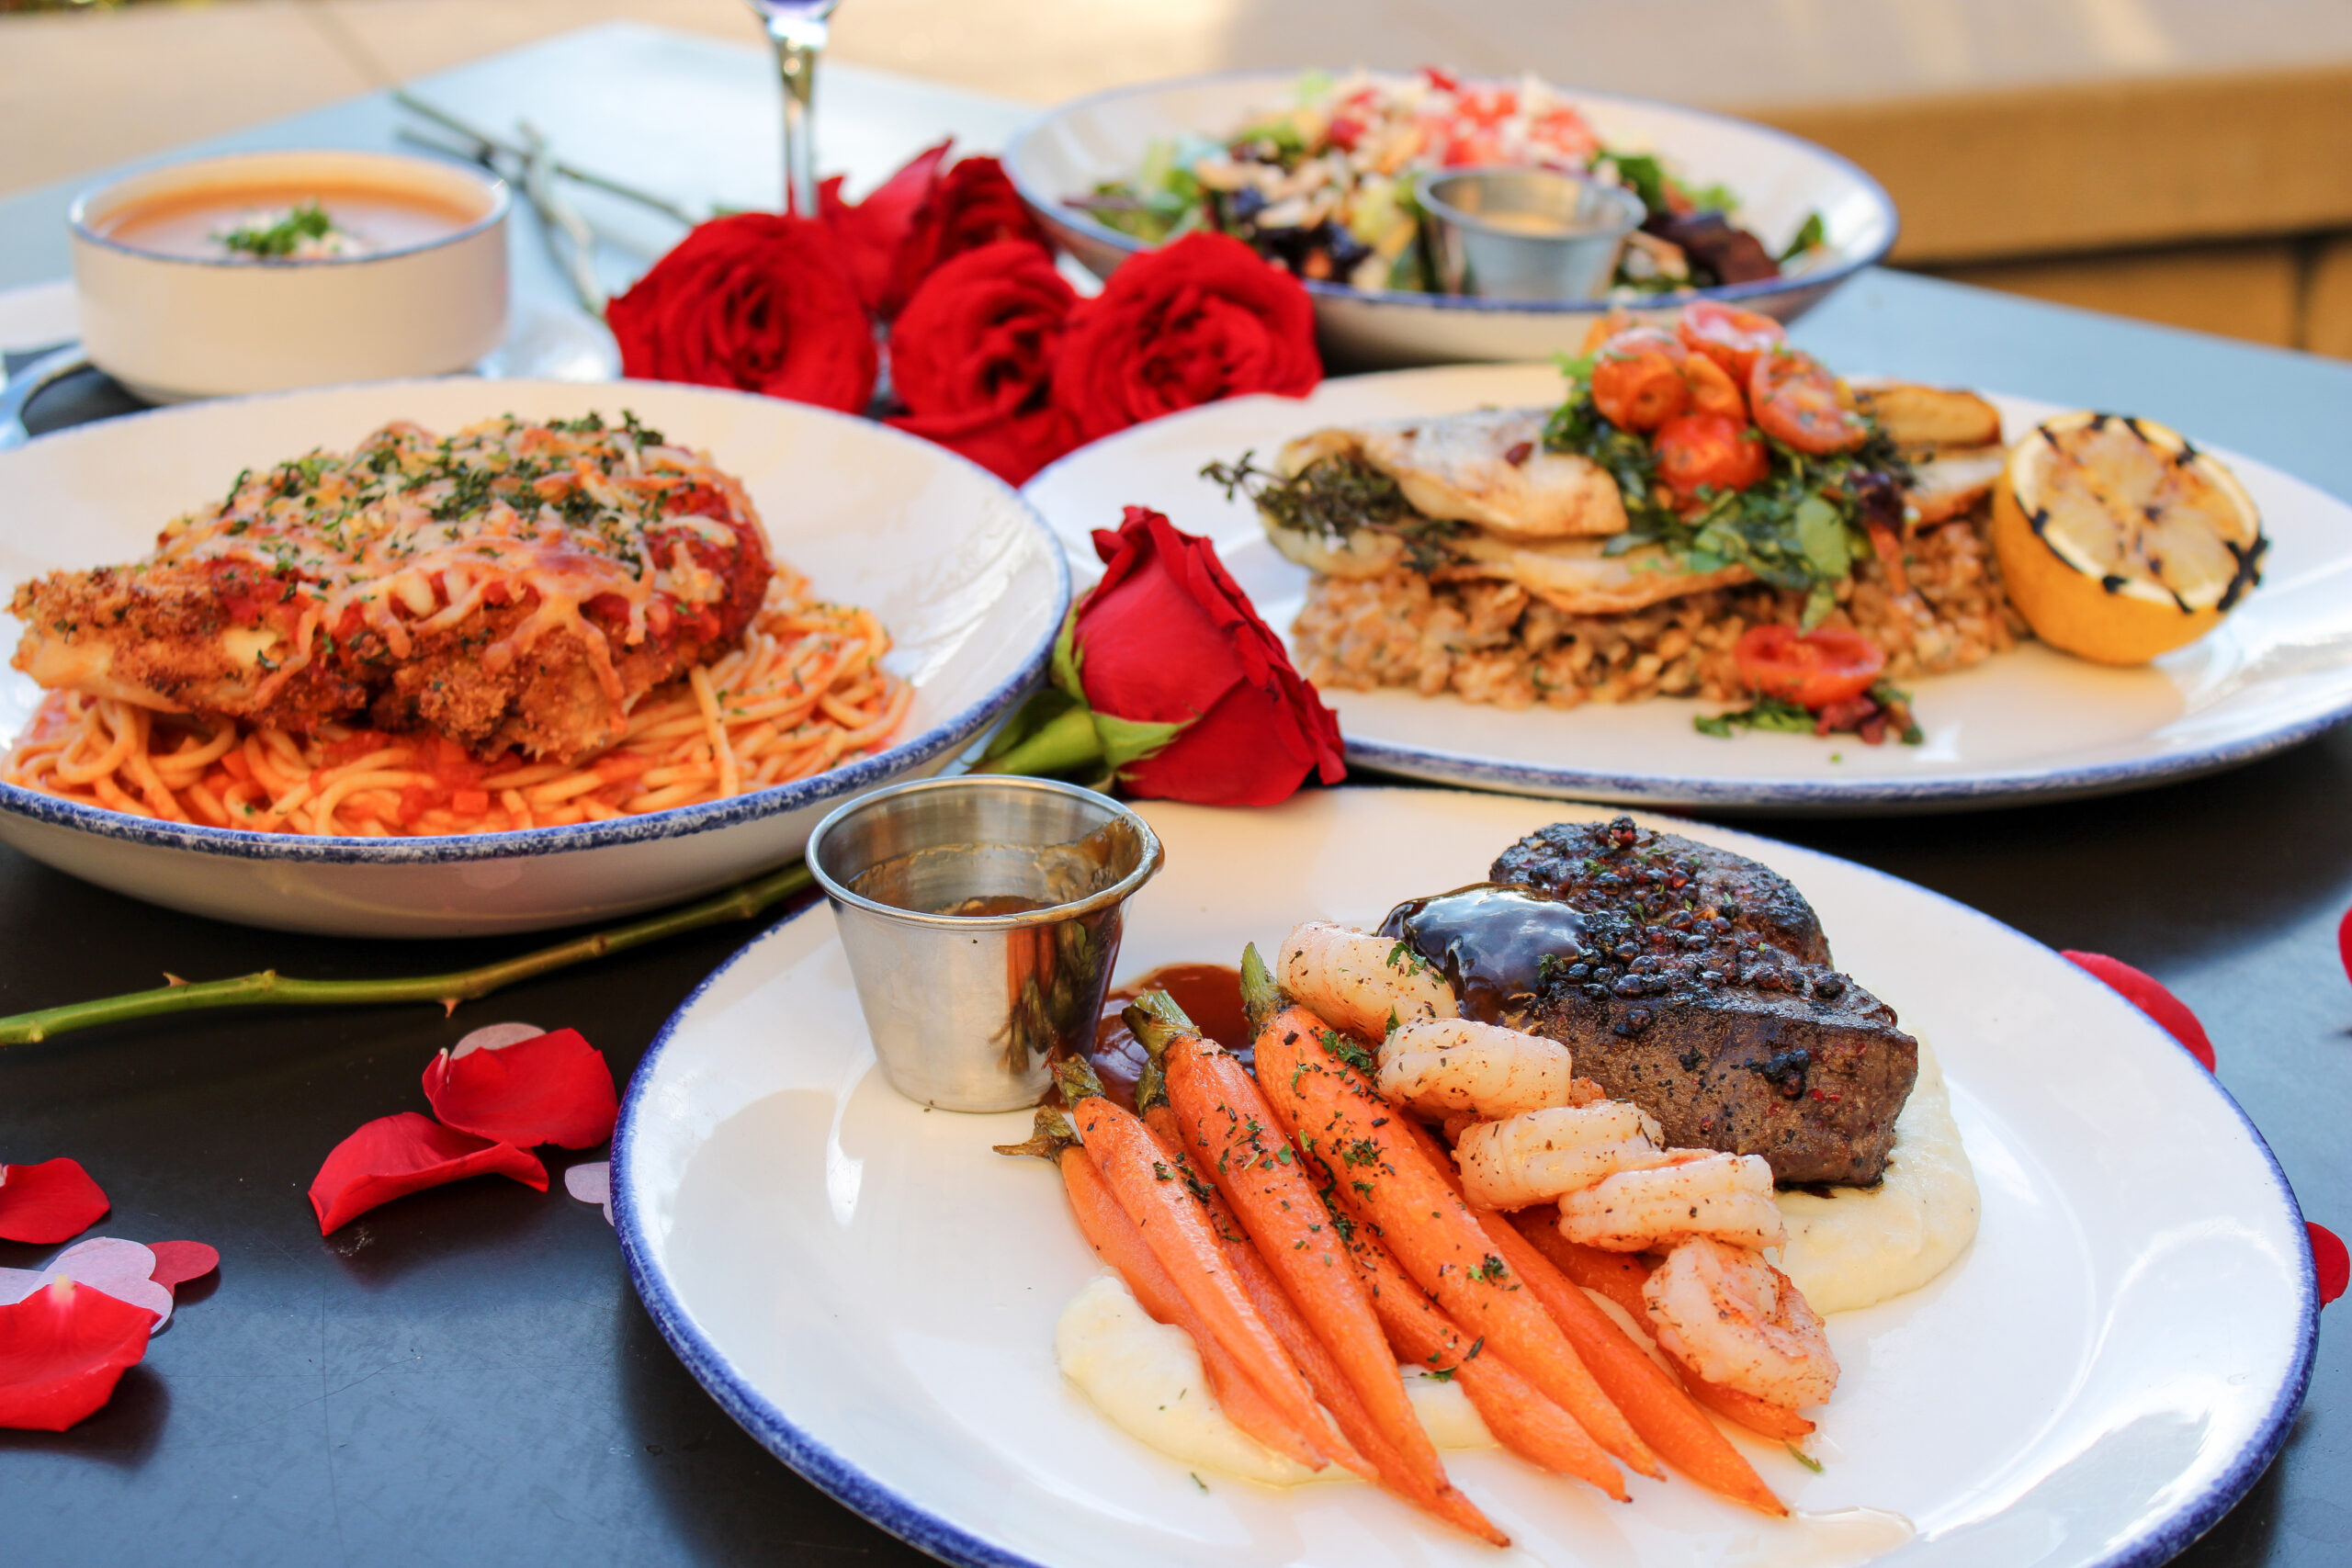 Valentine's Day dinner special with plates of food